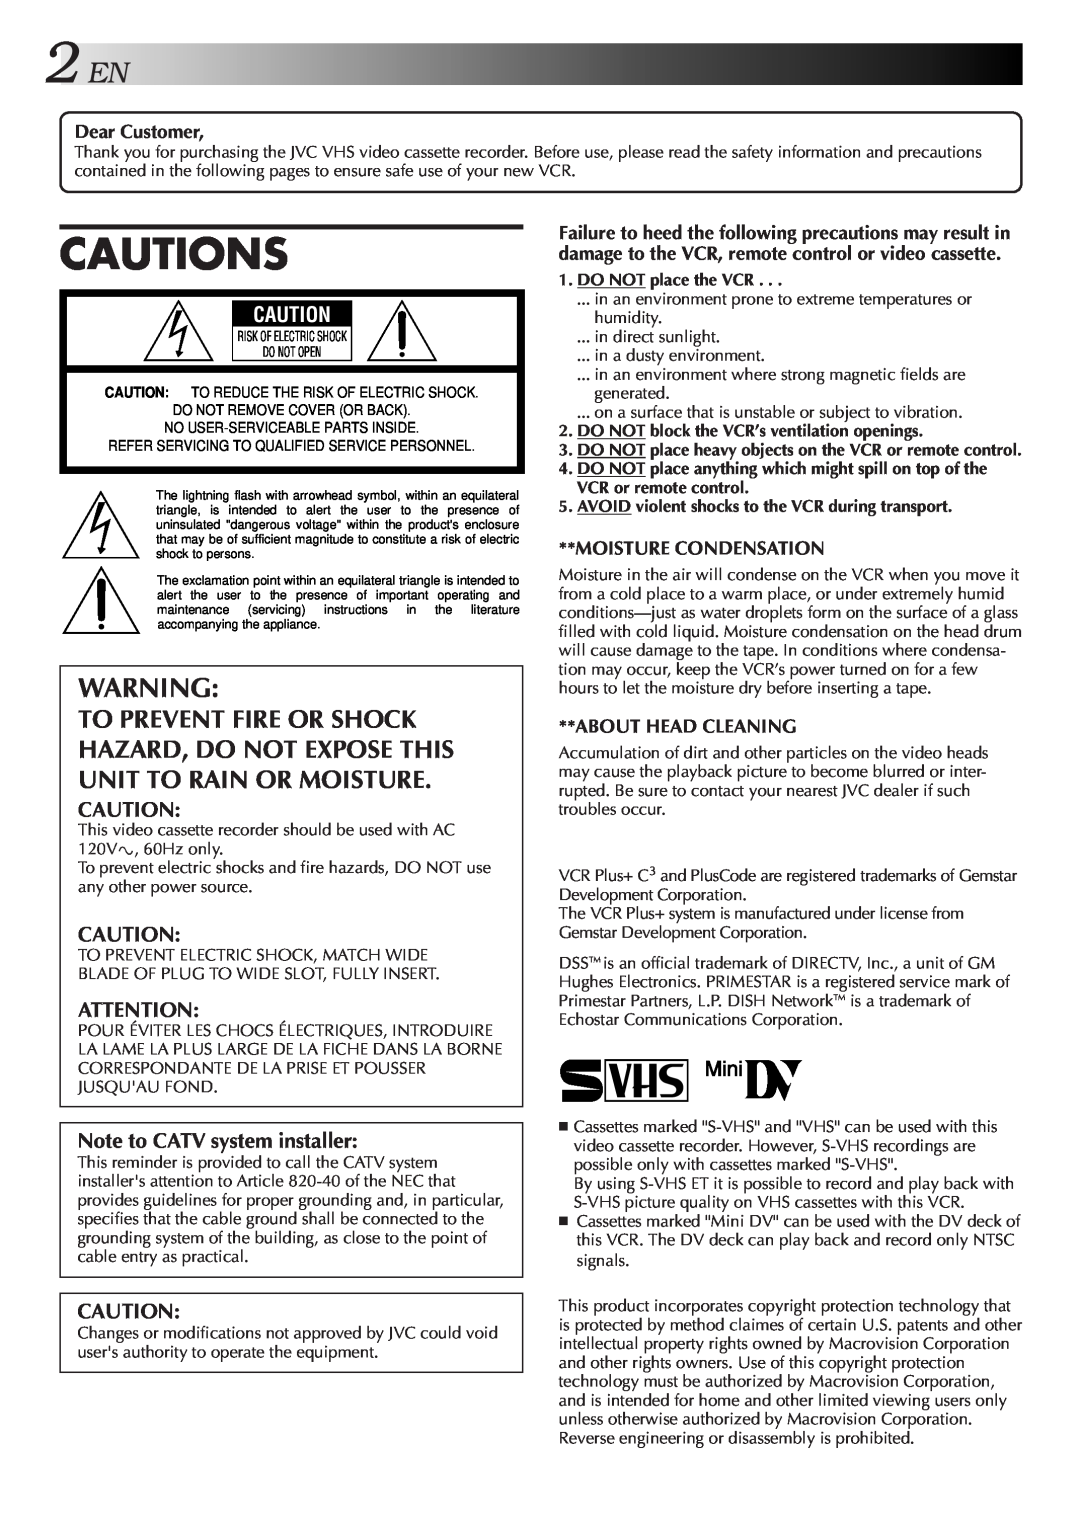 JVC Model HR-DVS1U manual Cautions, DO NOT place the VCR, DO NOT block the VCR’s ventilation openings 